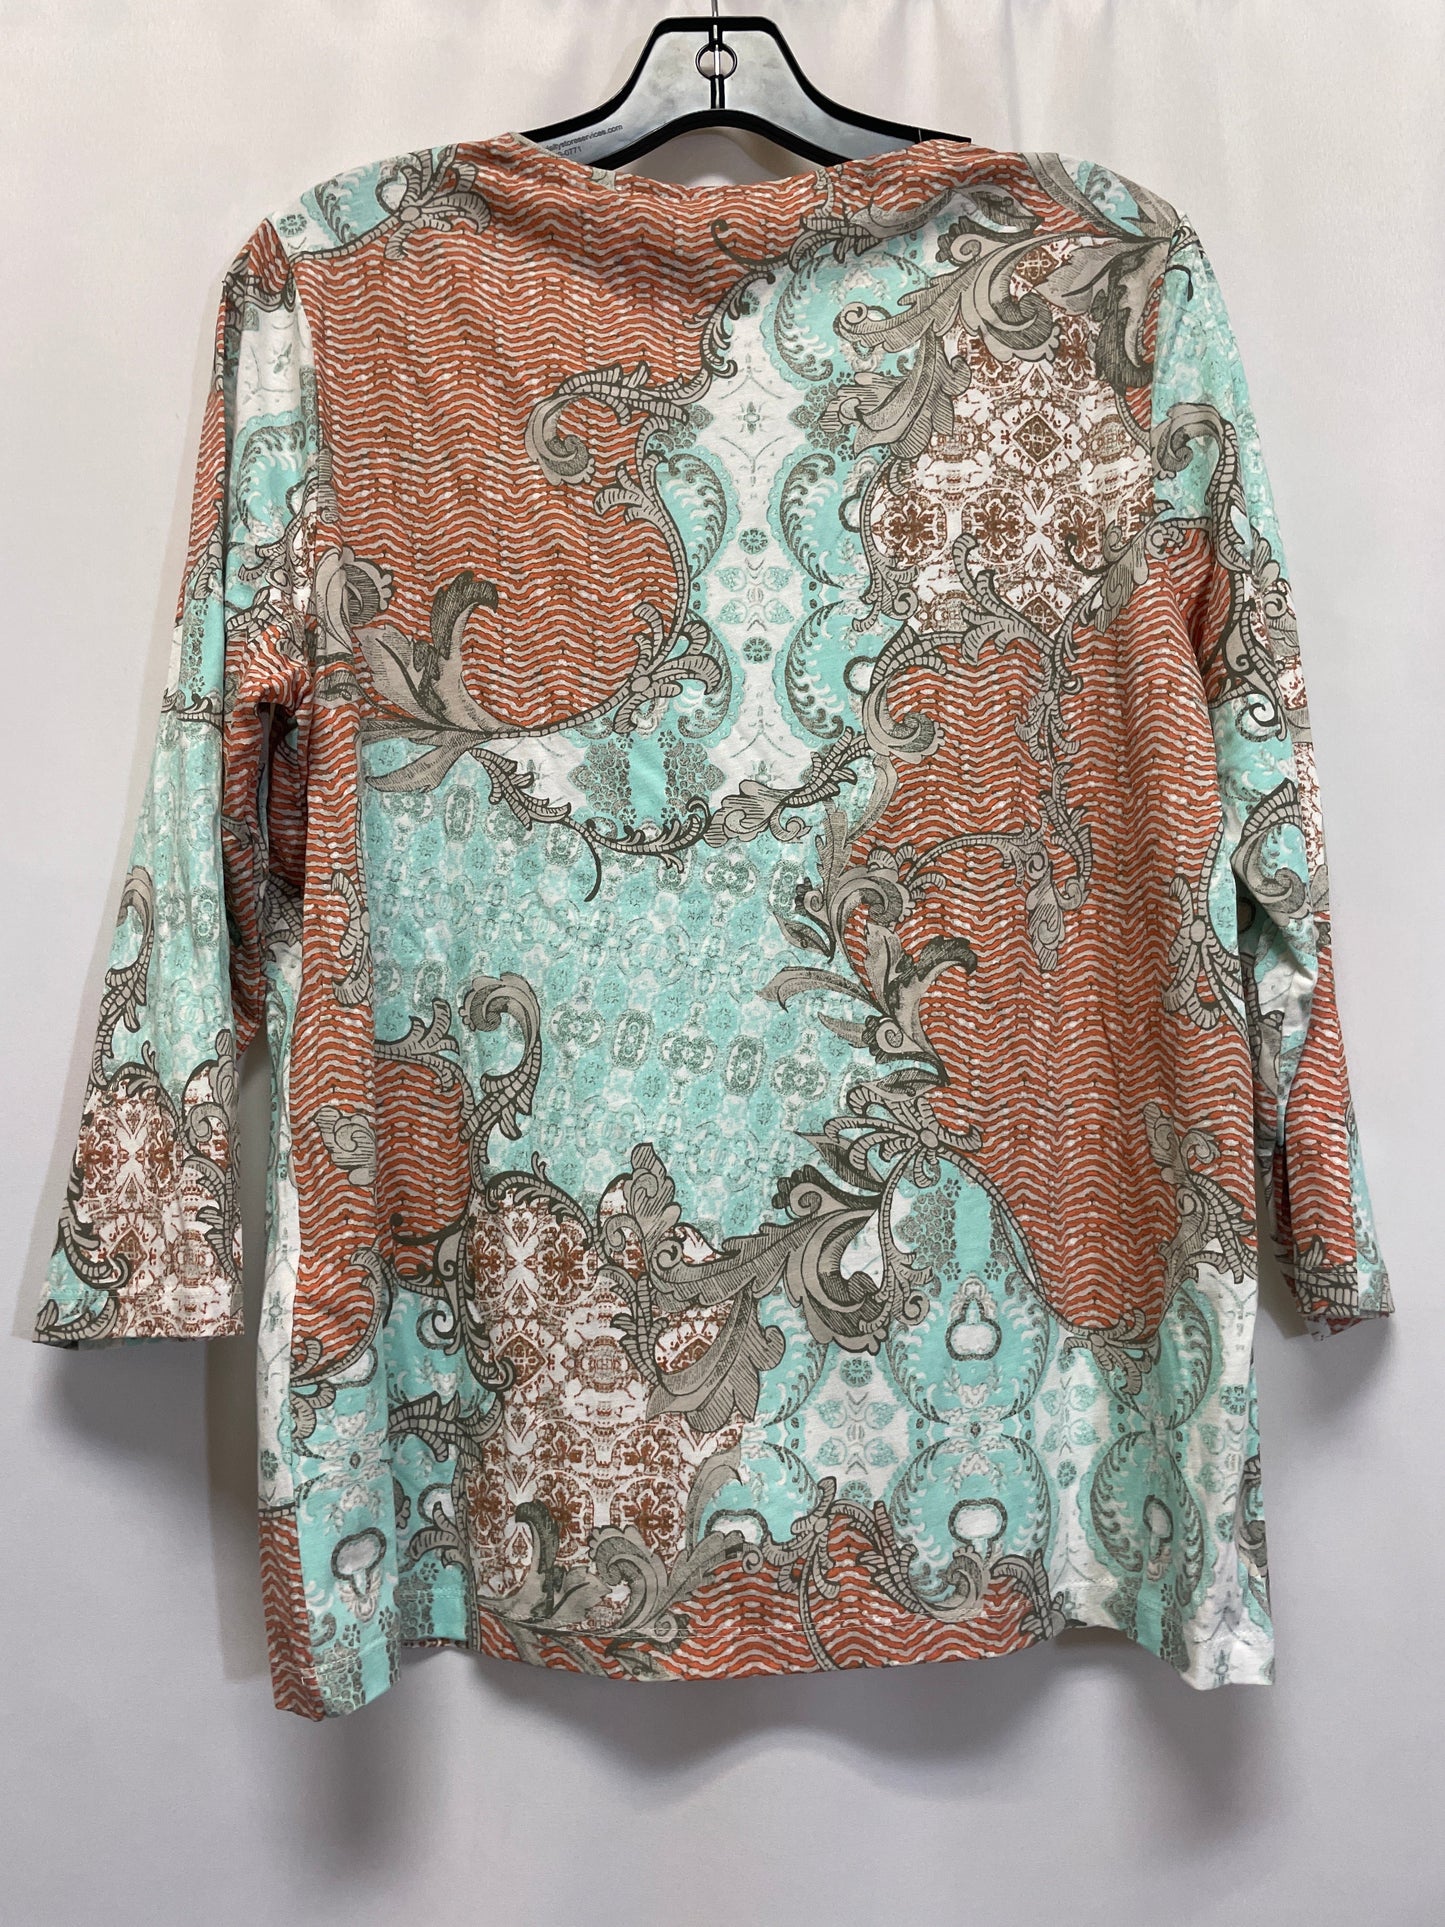 Teal Top 3/4 Sleeve Chicos, Size M